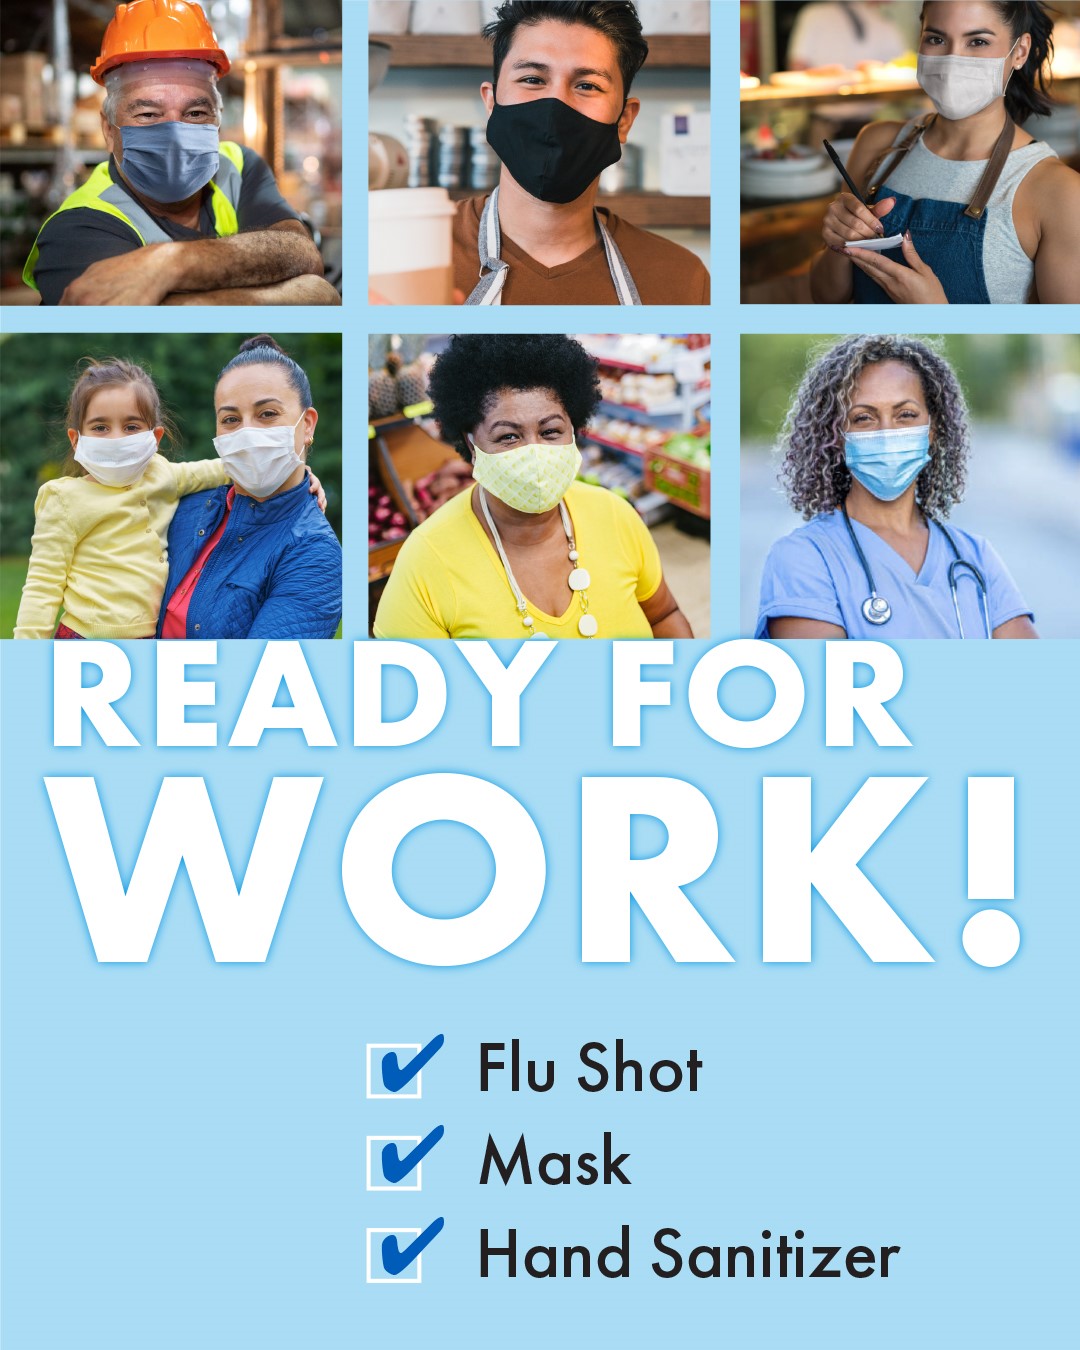 "Ready for Work!" poster with images of various workers in face masks and "flu shot", "mask", and "hand sanitizer" boxes checked